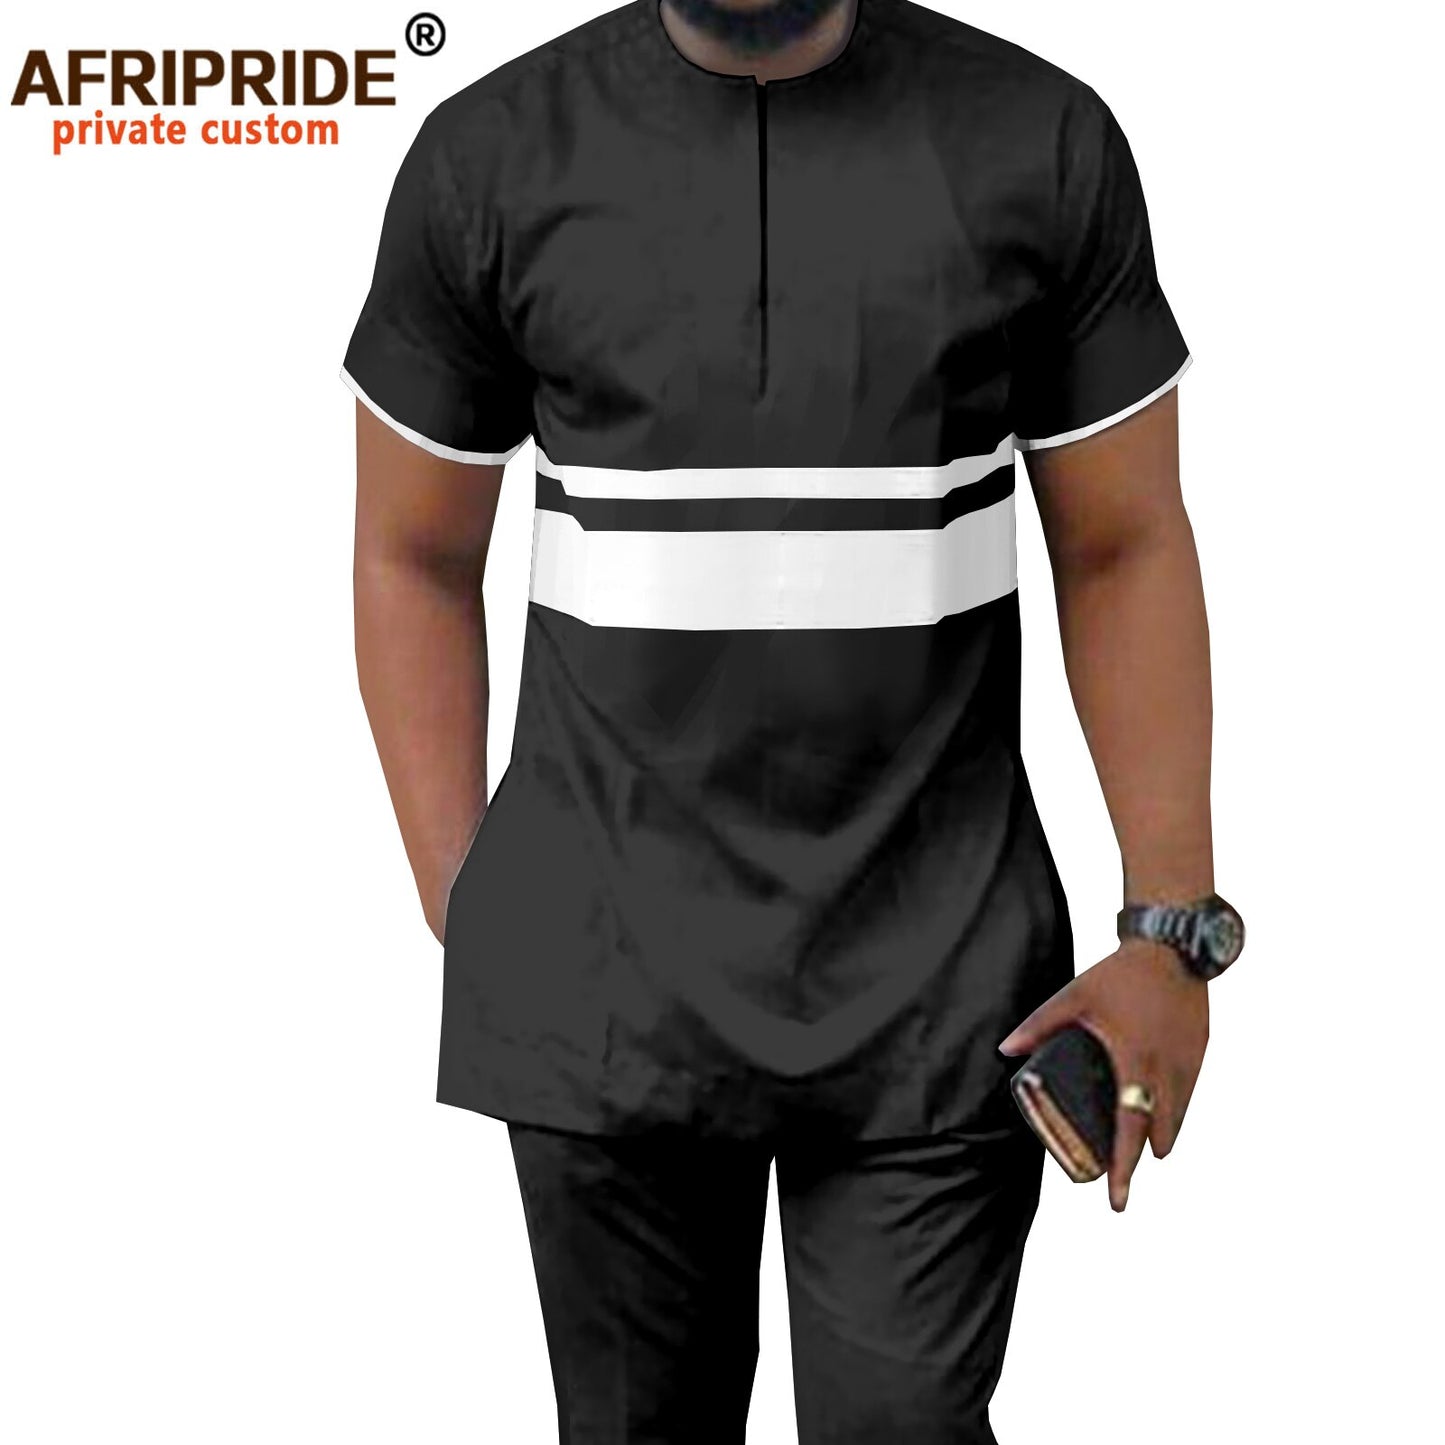 African Men`s Clothing Short Sleeve Dashiki Shirts and Pants 2 Piece Set Plus Size Casual Outfits Ankara Style Blouse A2116042